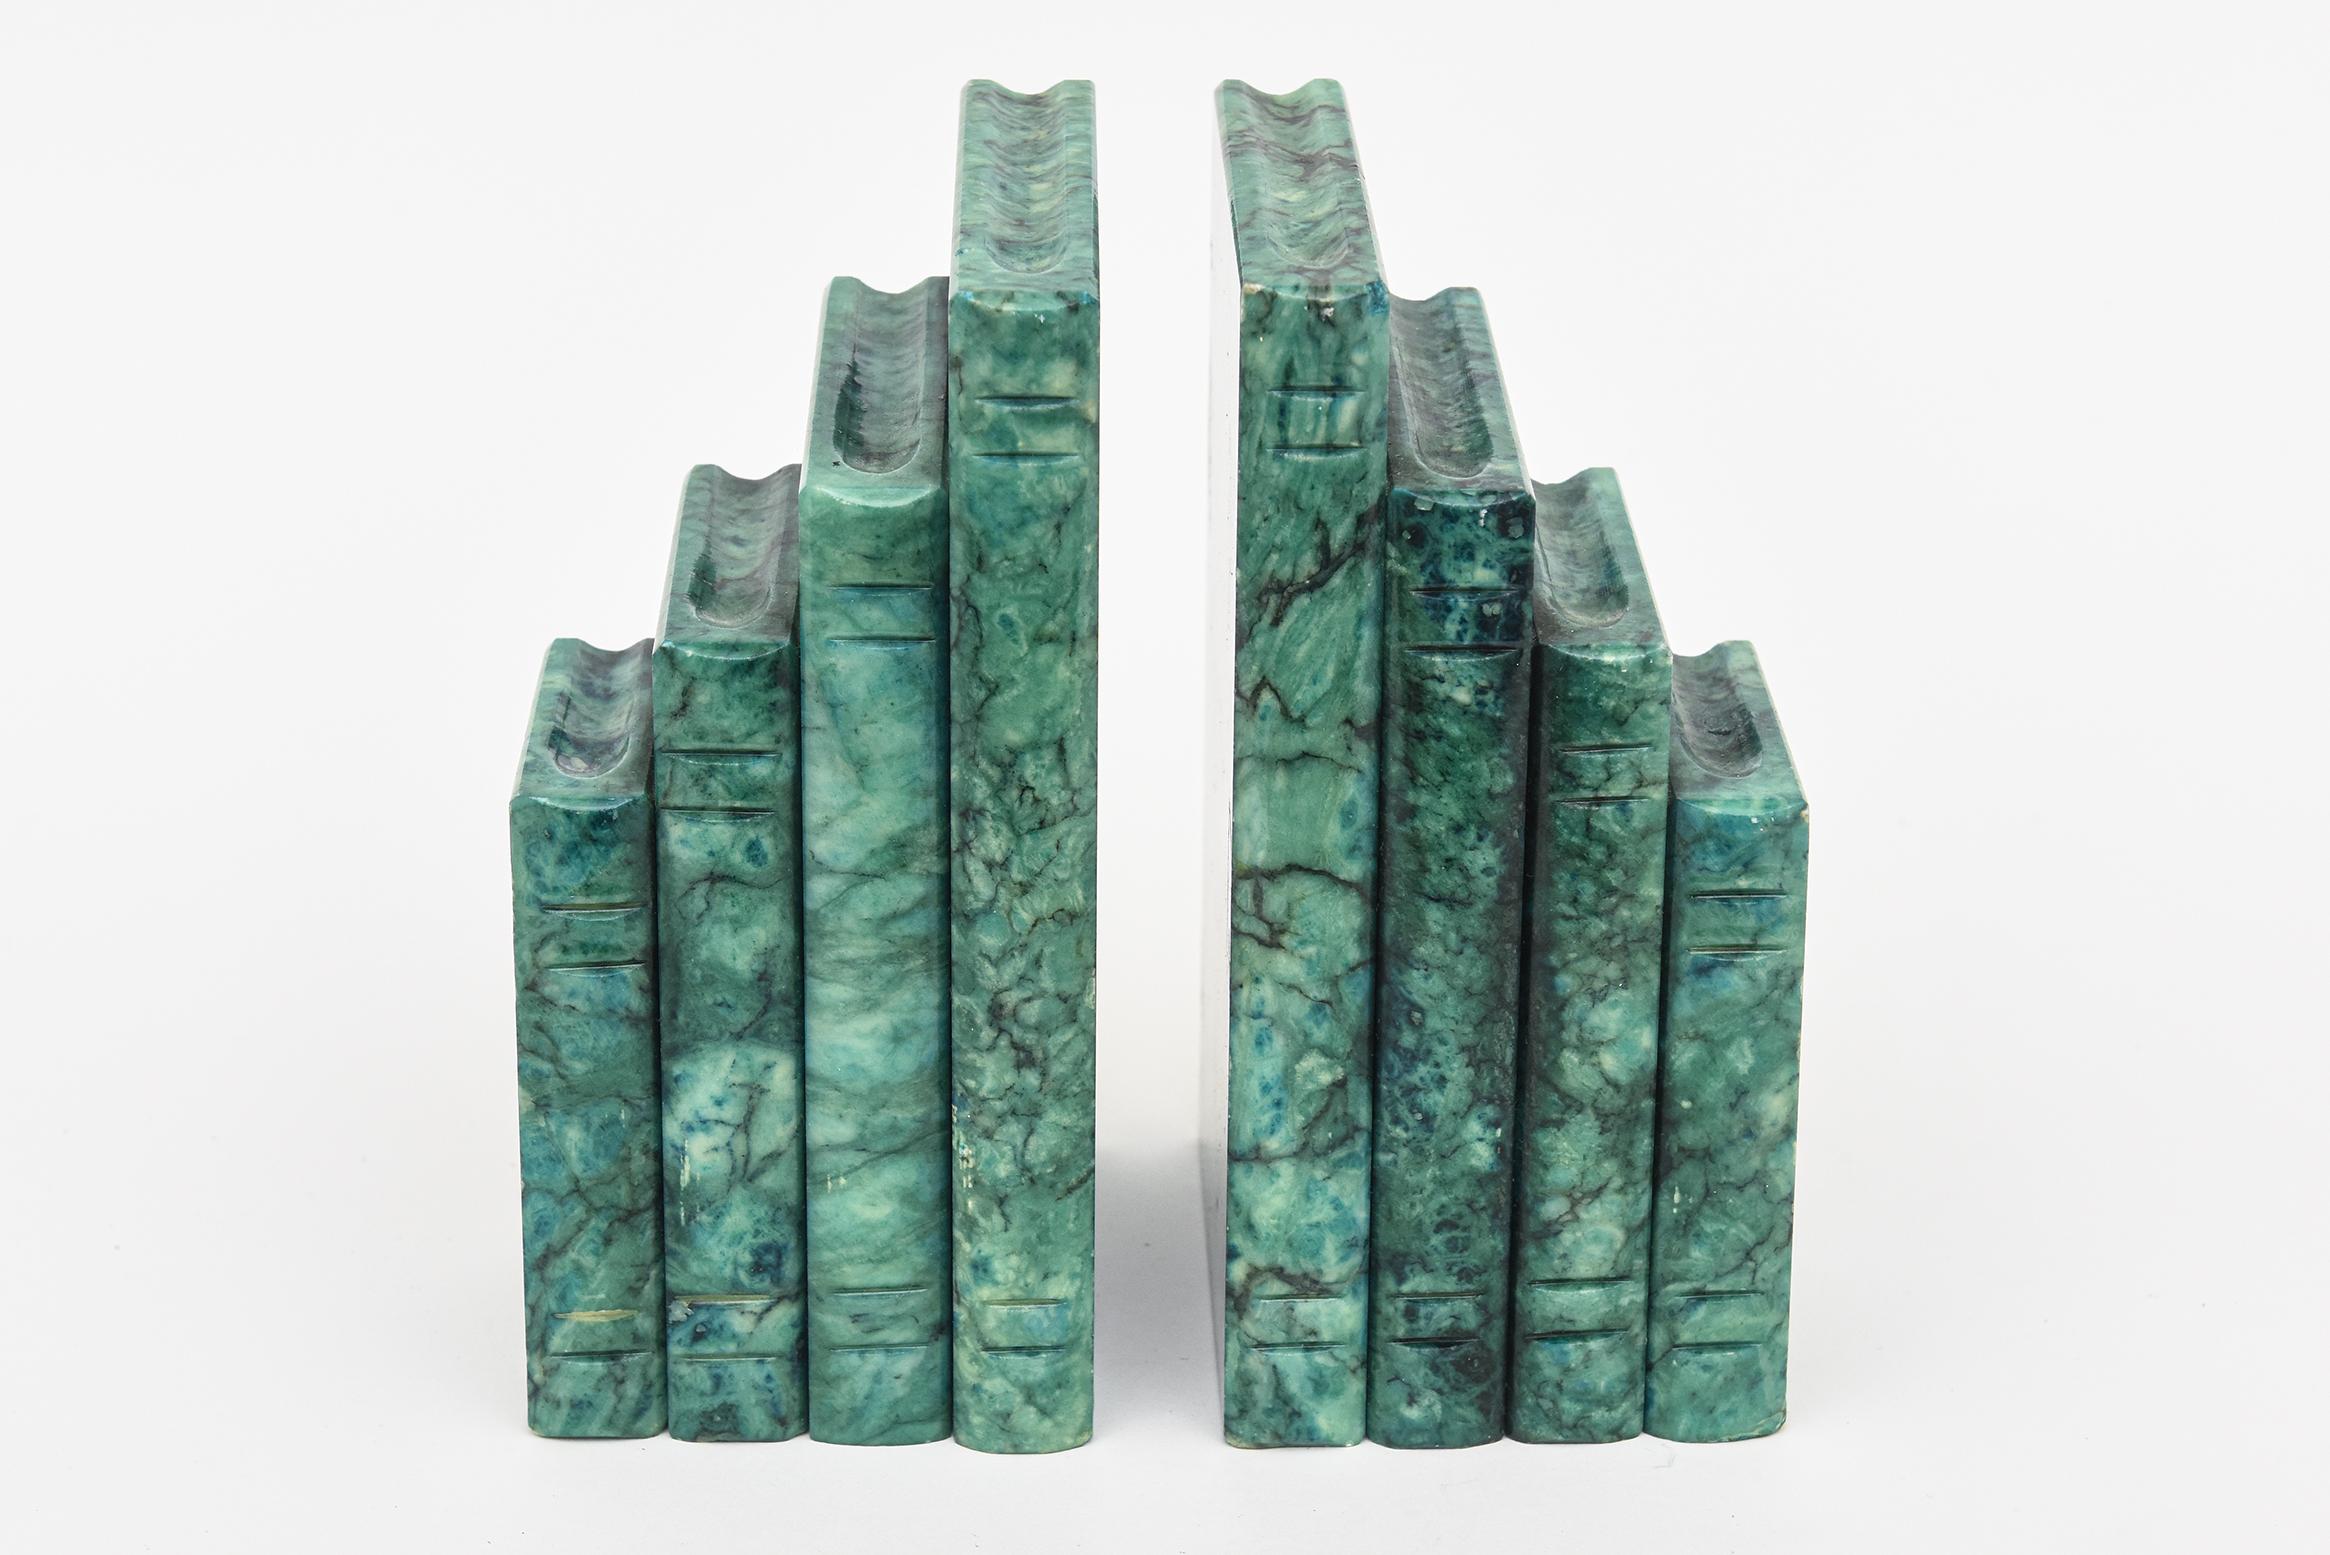 These fabulous turquoise sea green Italian vintage bookends are the form of books.
The original sticker on the bottom reads genuine alabaster Made In Italy with stickers of number of 76-1. They are play on play. The original felt on the bottom